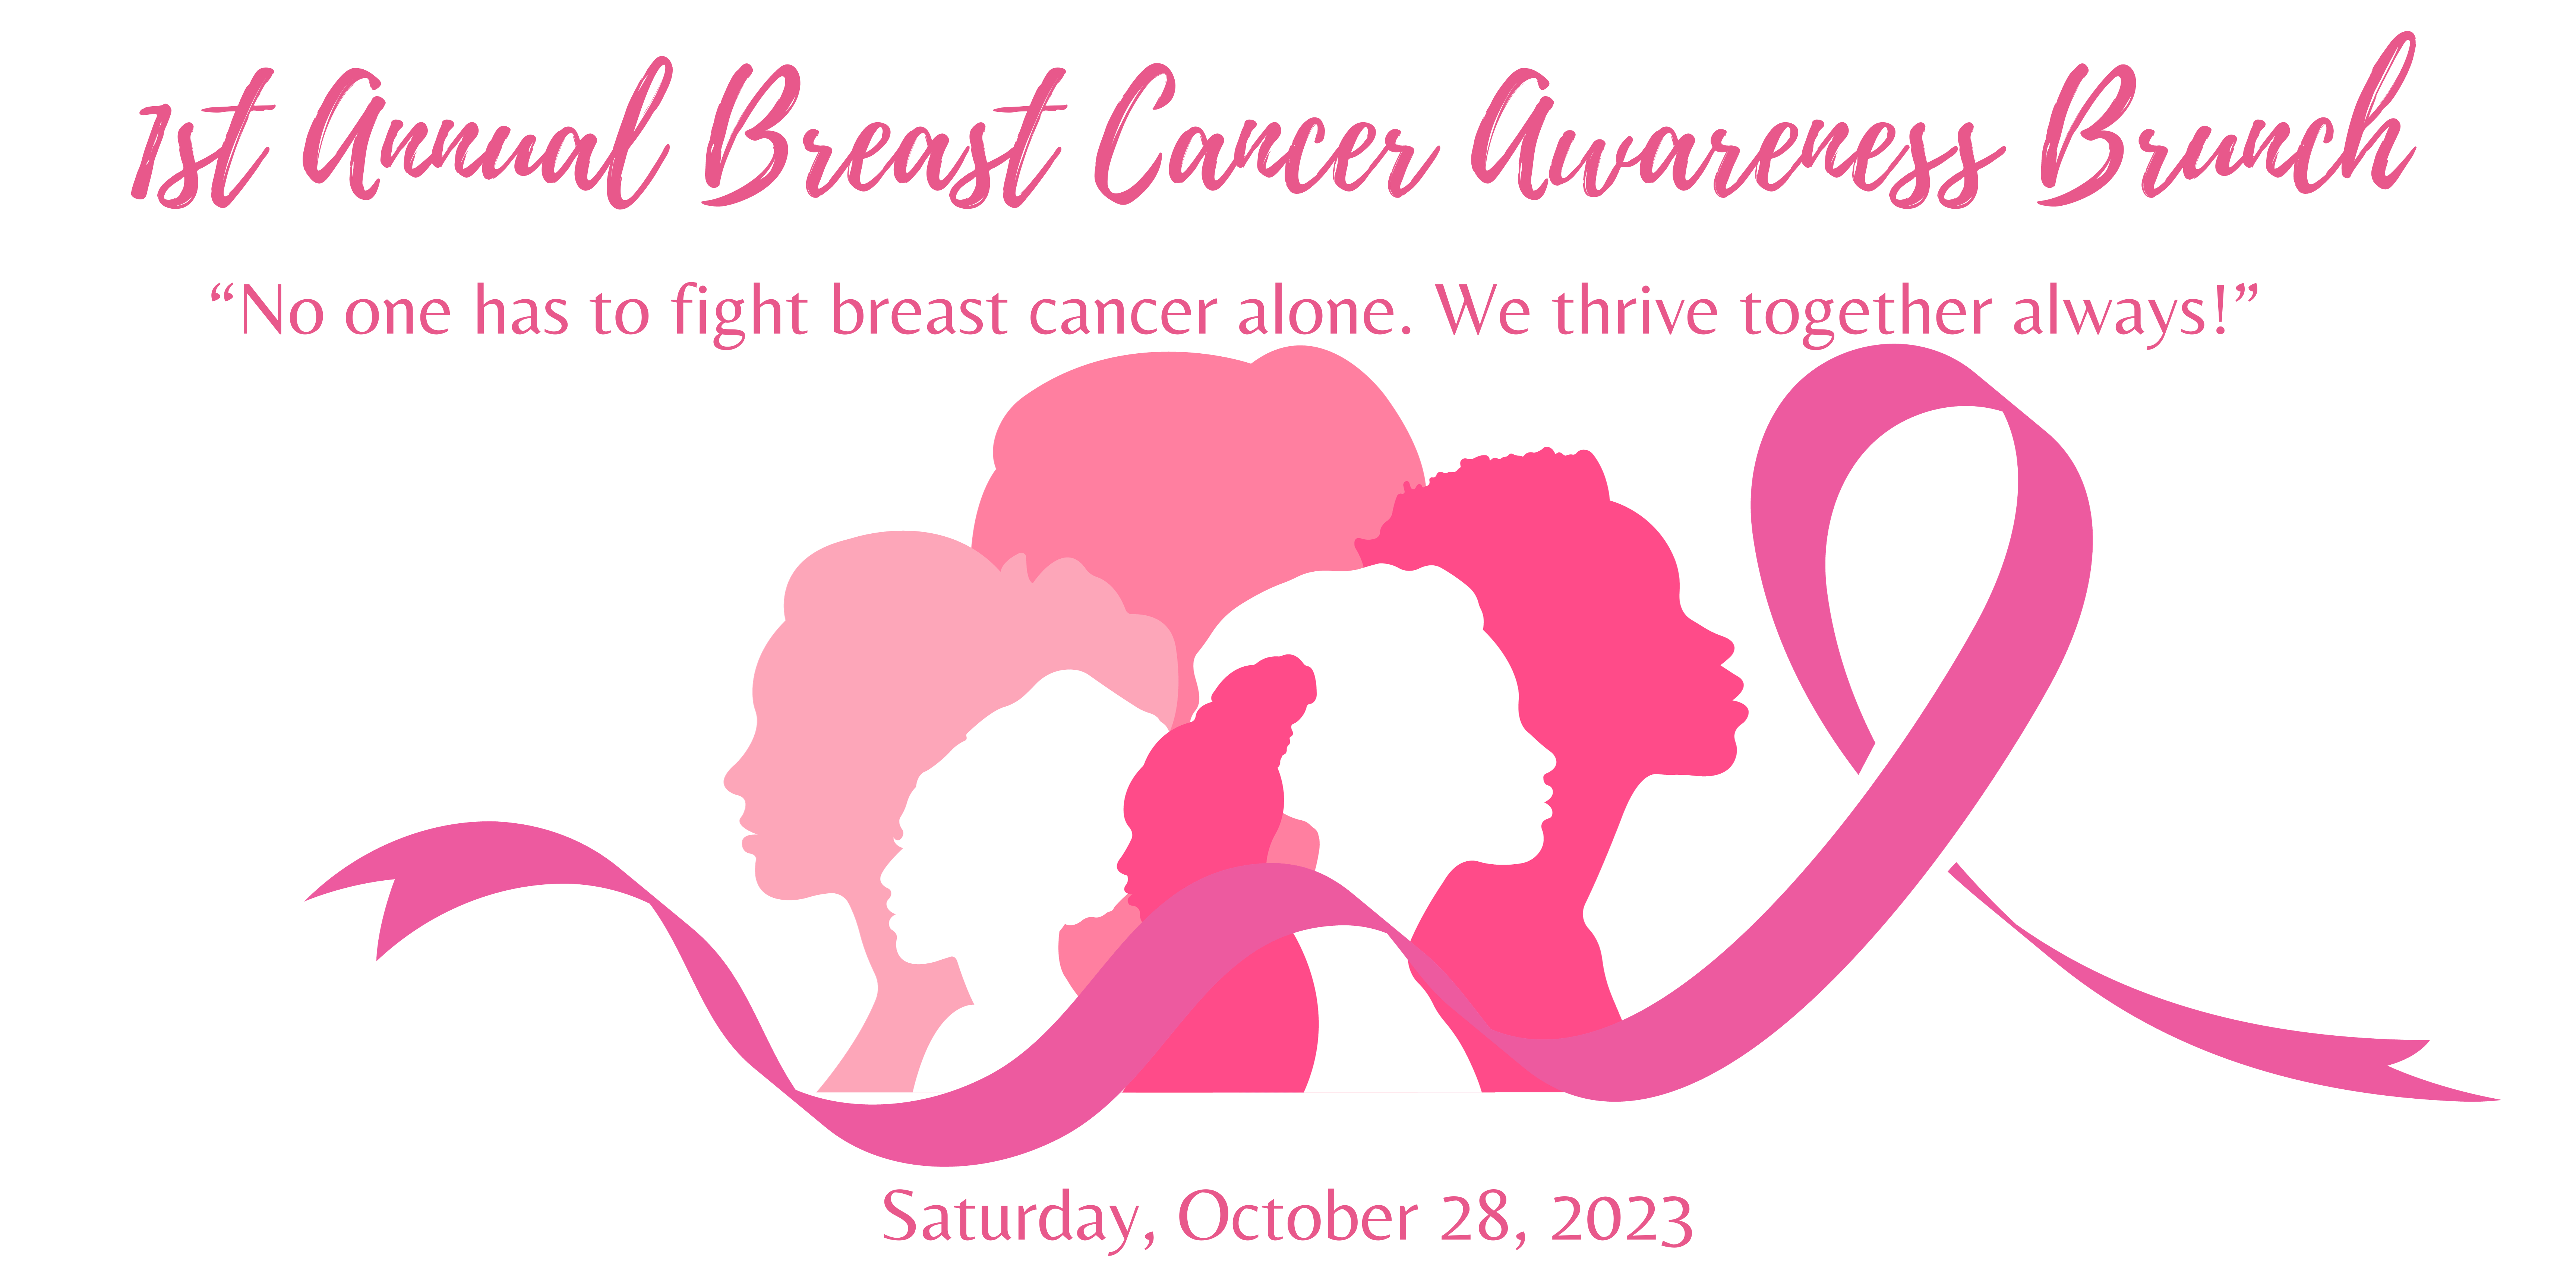 1st Annual Breast Cancer Awareness Brunch